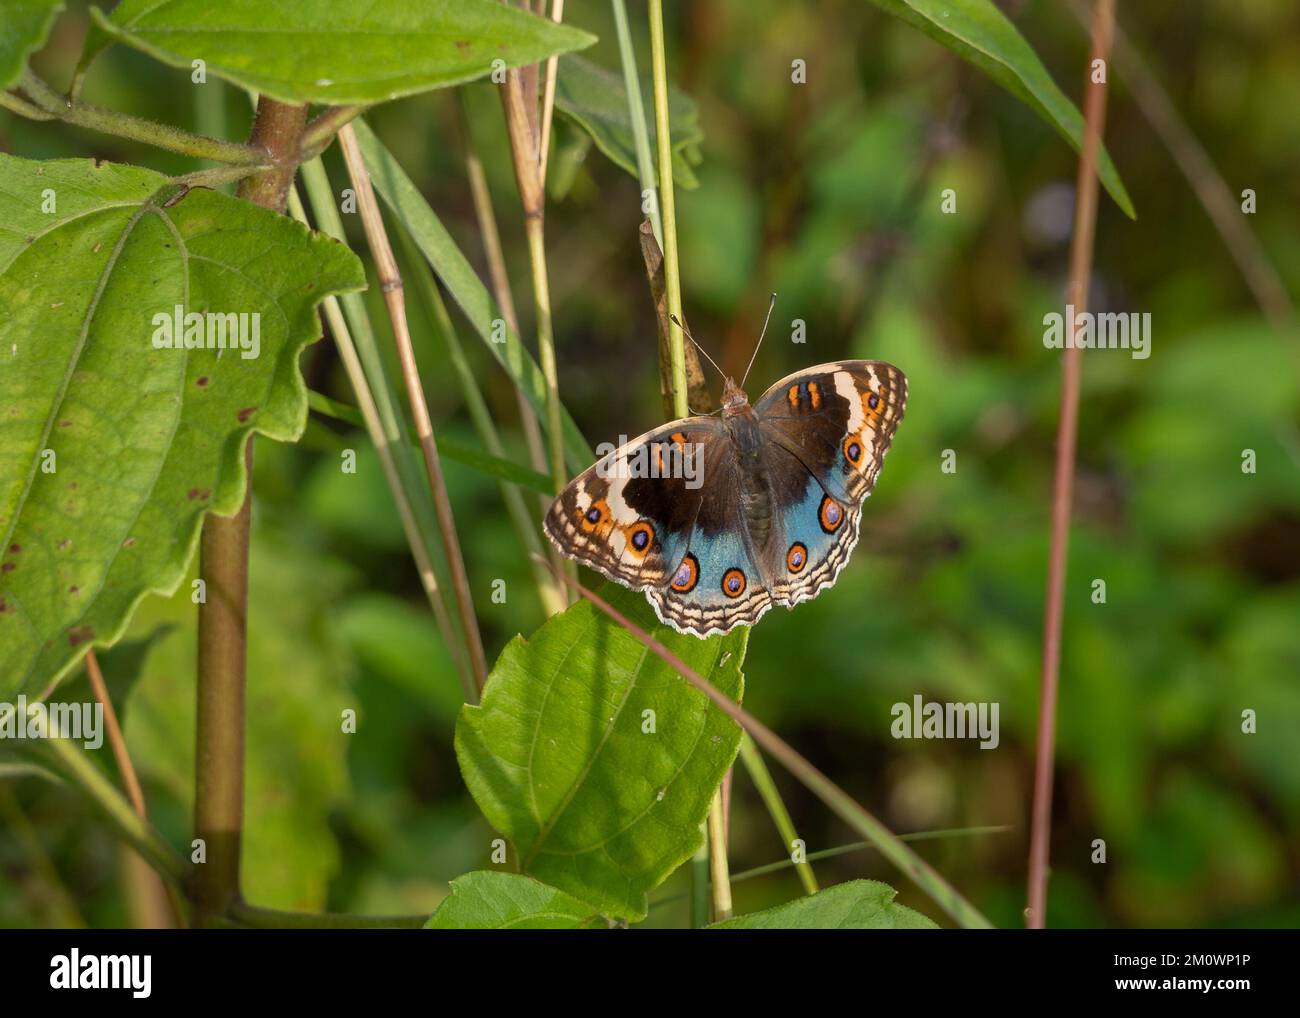 Colorful blue orange and brown junonia orithya nymphalid butterfly aka blue pansy, eyed pansy or blue argus on grass in morning sunlight, Thailand Stock Photo